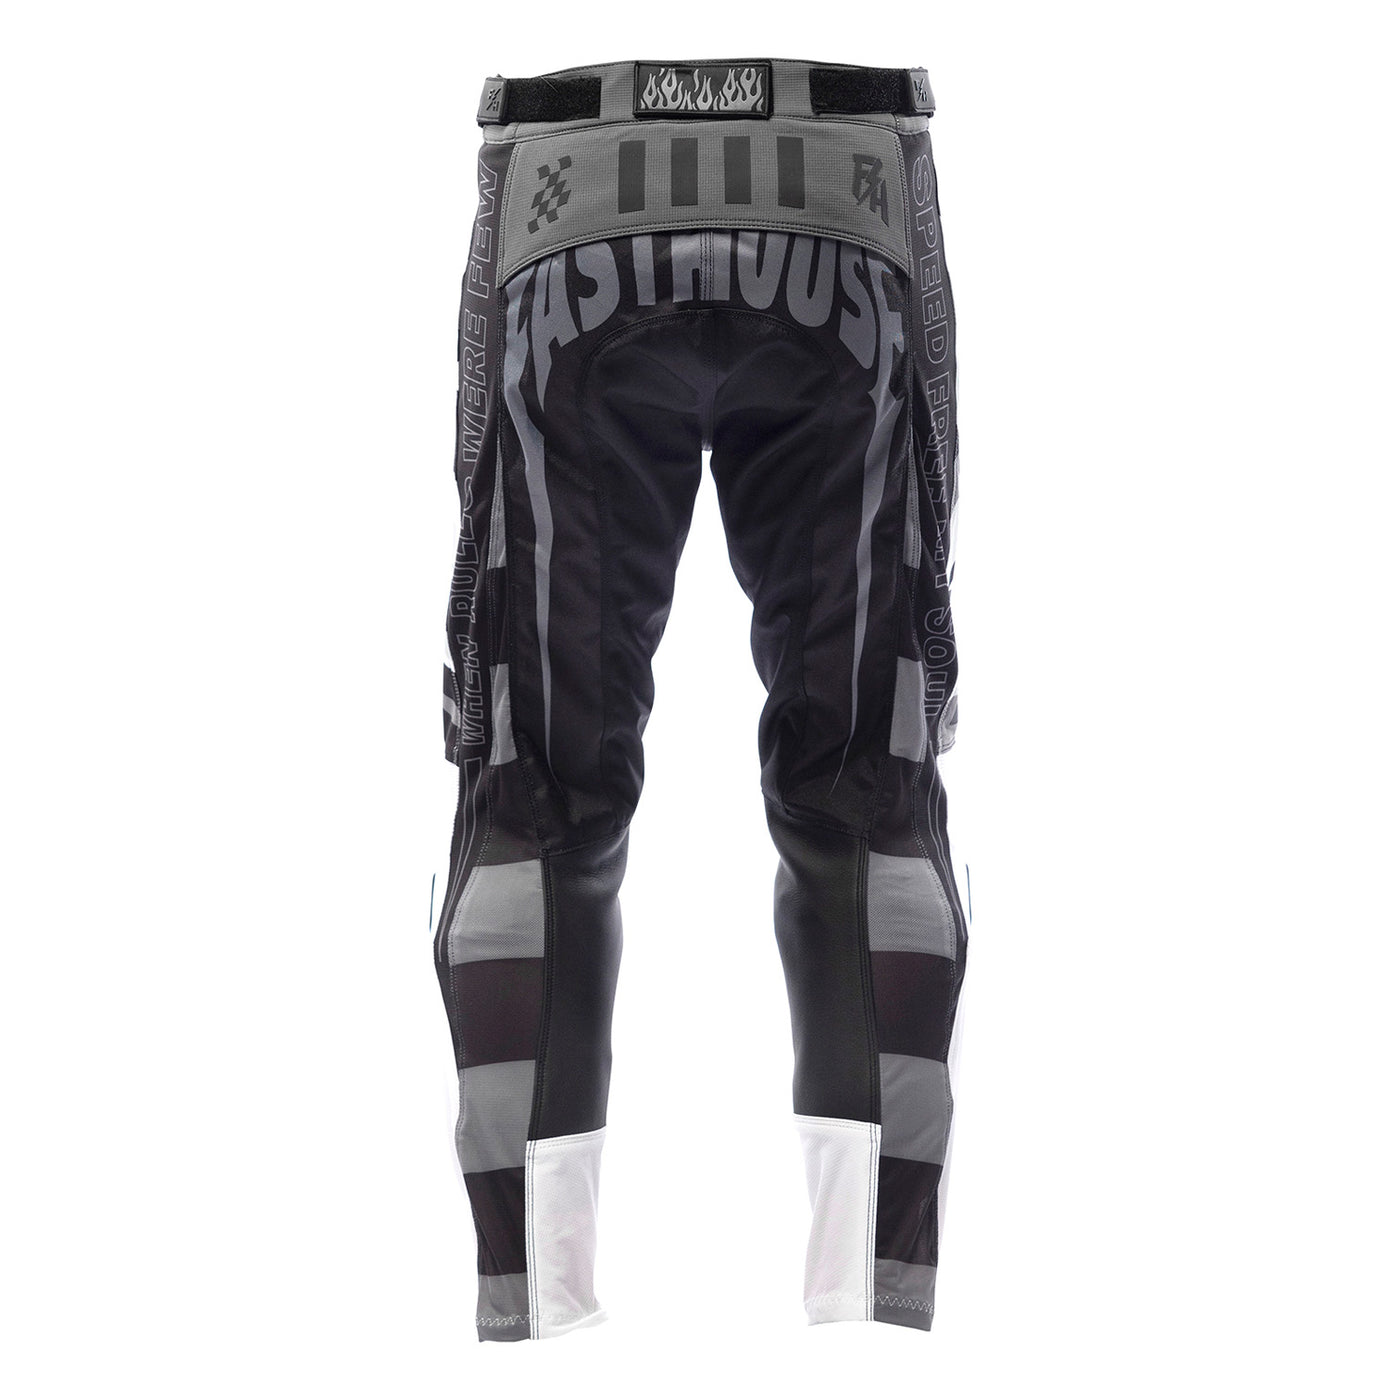 Fasthouse Grindhouse Riot Pant